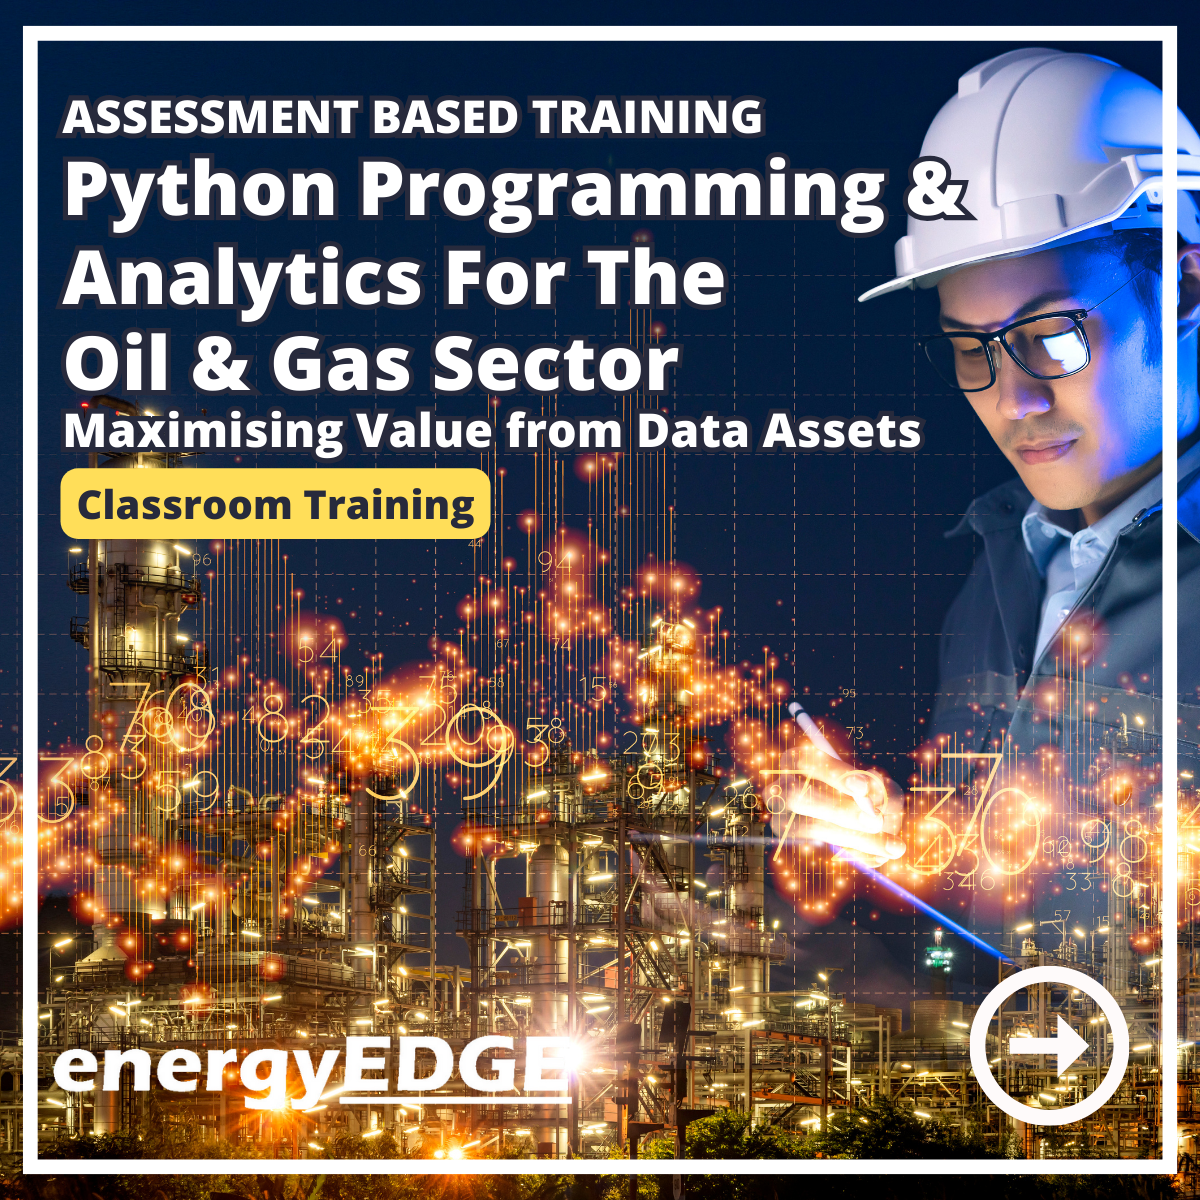 Assessment Based Training - Python Programming & Analytics for the Oil & Gas Sector - Maximising Value from Data Assets